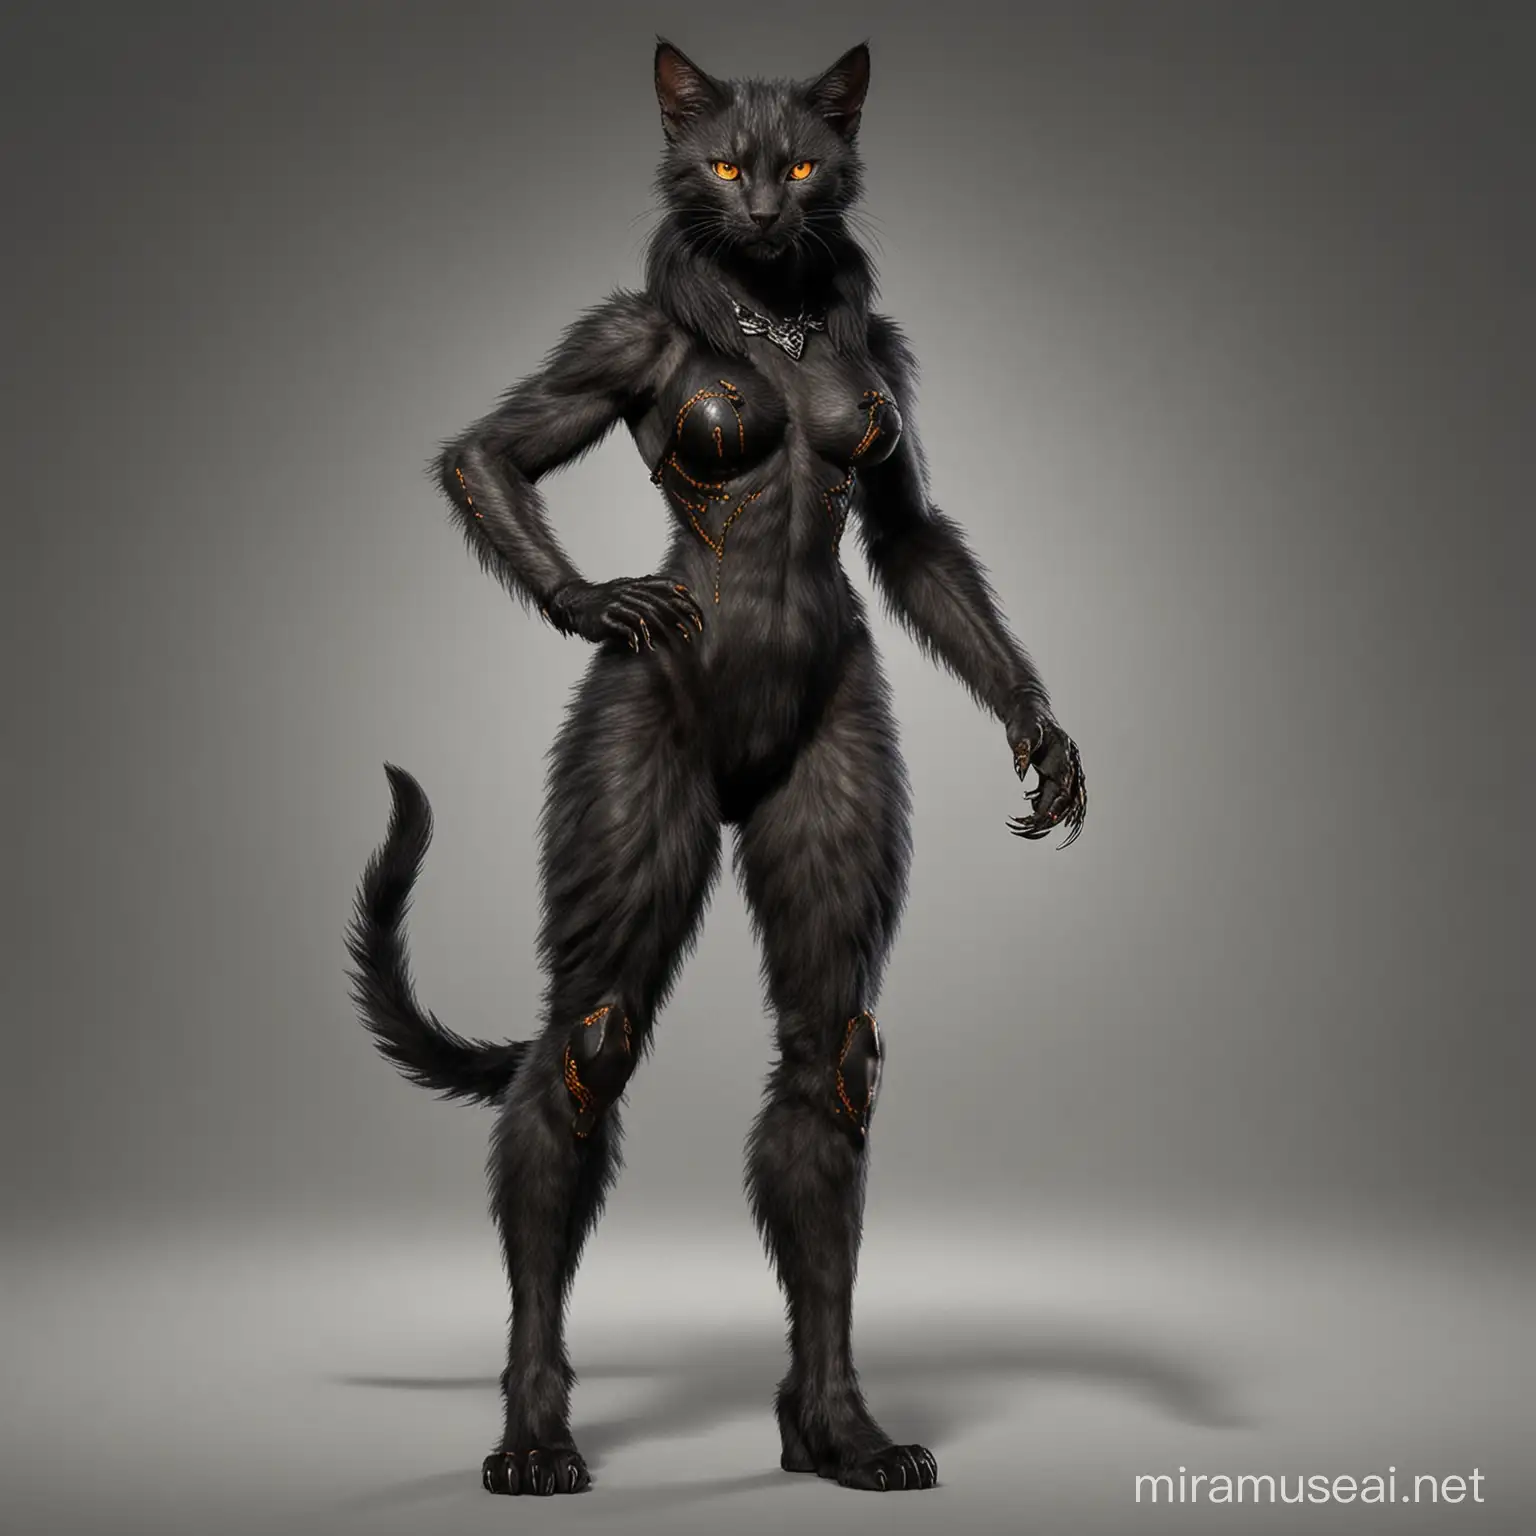 Female werecat. Grayish black fur and amber eyes. Complete Full body picture from head to toe. Humanoid but beastly